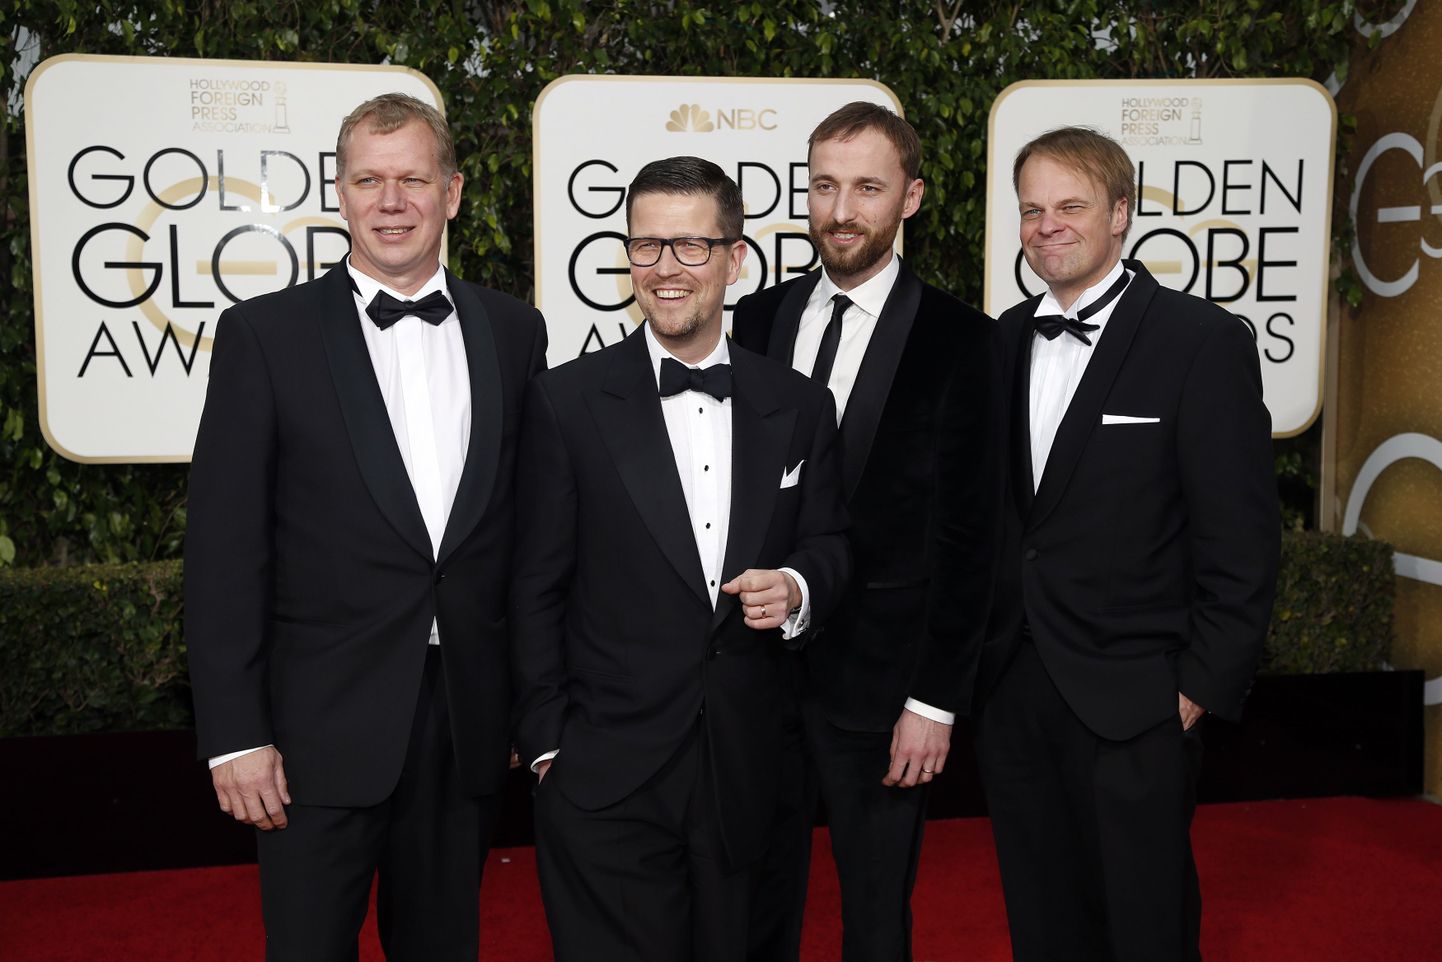 (L-R) Kai Nordberg, Klaus Haro, Mart Avandi and Kaarle Aho with the Finnish film "The Fencer" arrive at the 73rd Golden Globe Awards in Beverly Hills, California January 10, 2016.  REUTERS/Mario Anzuoni